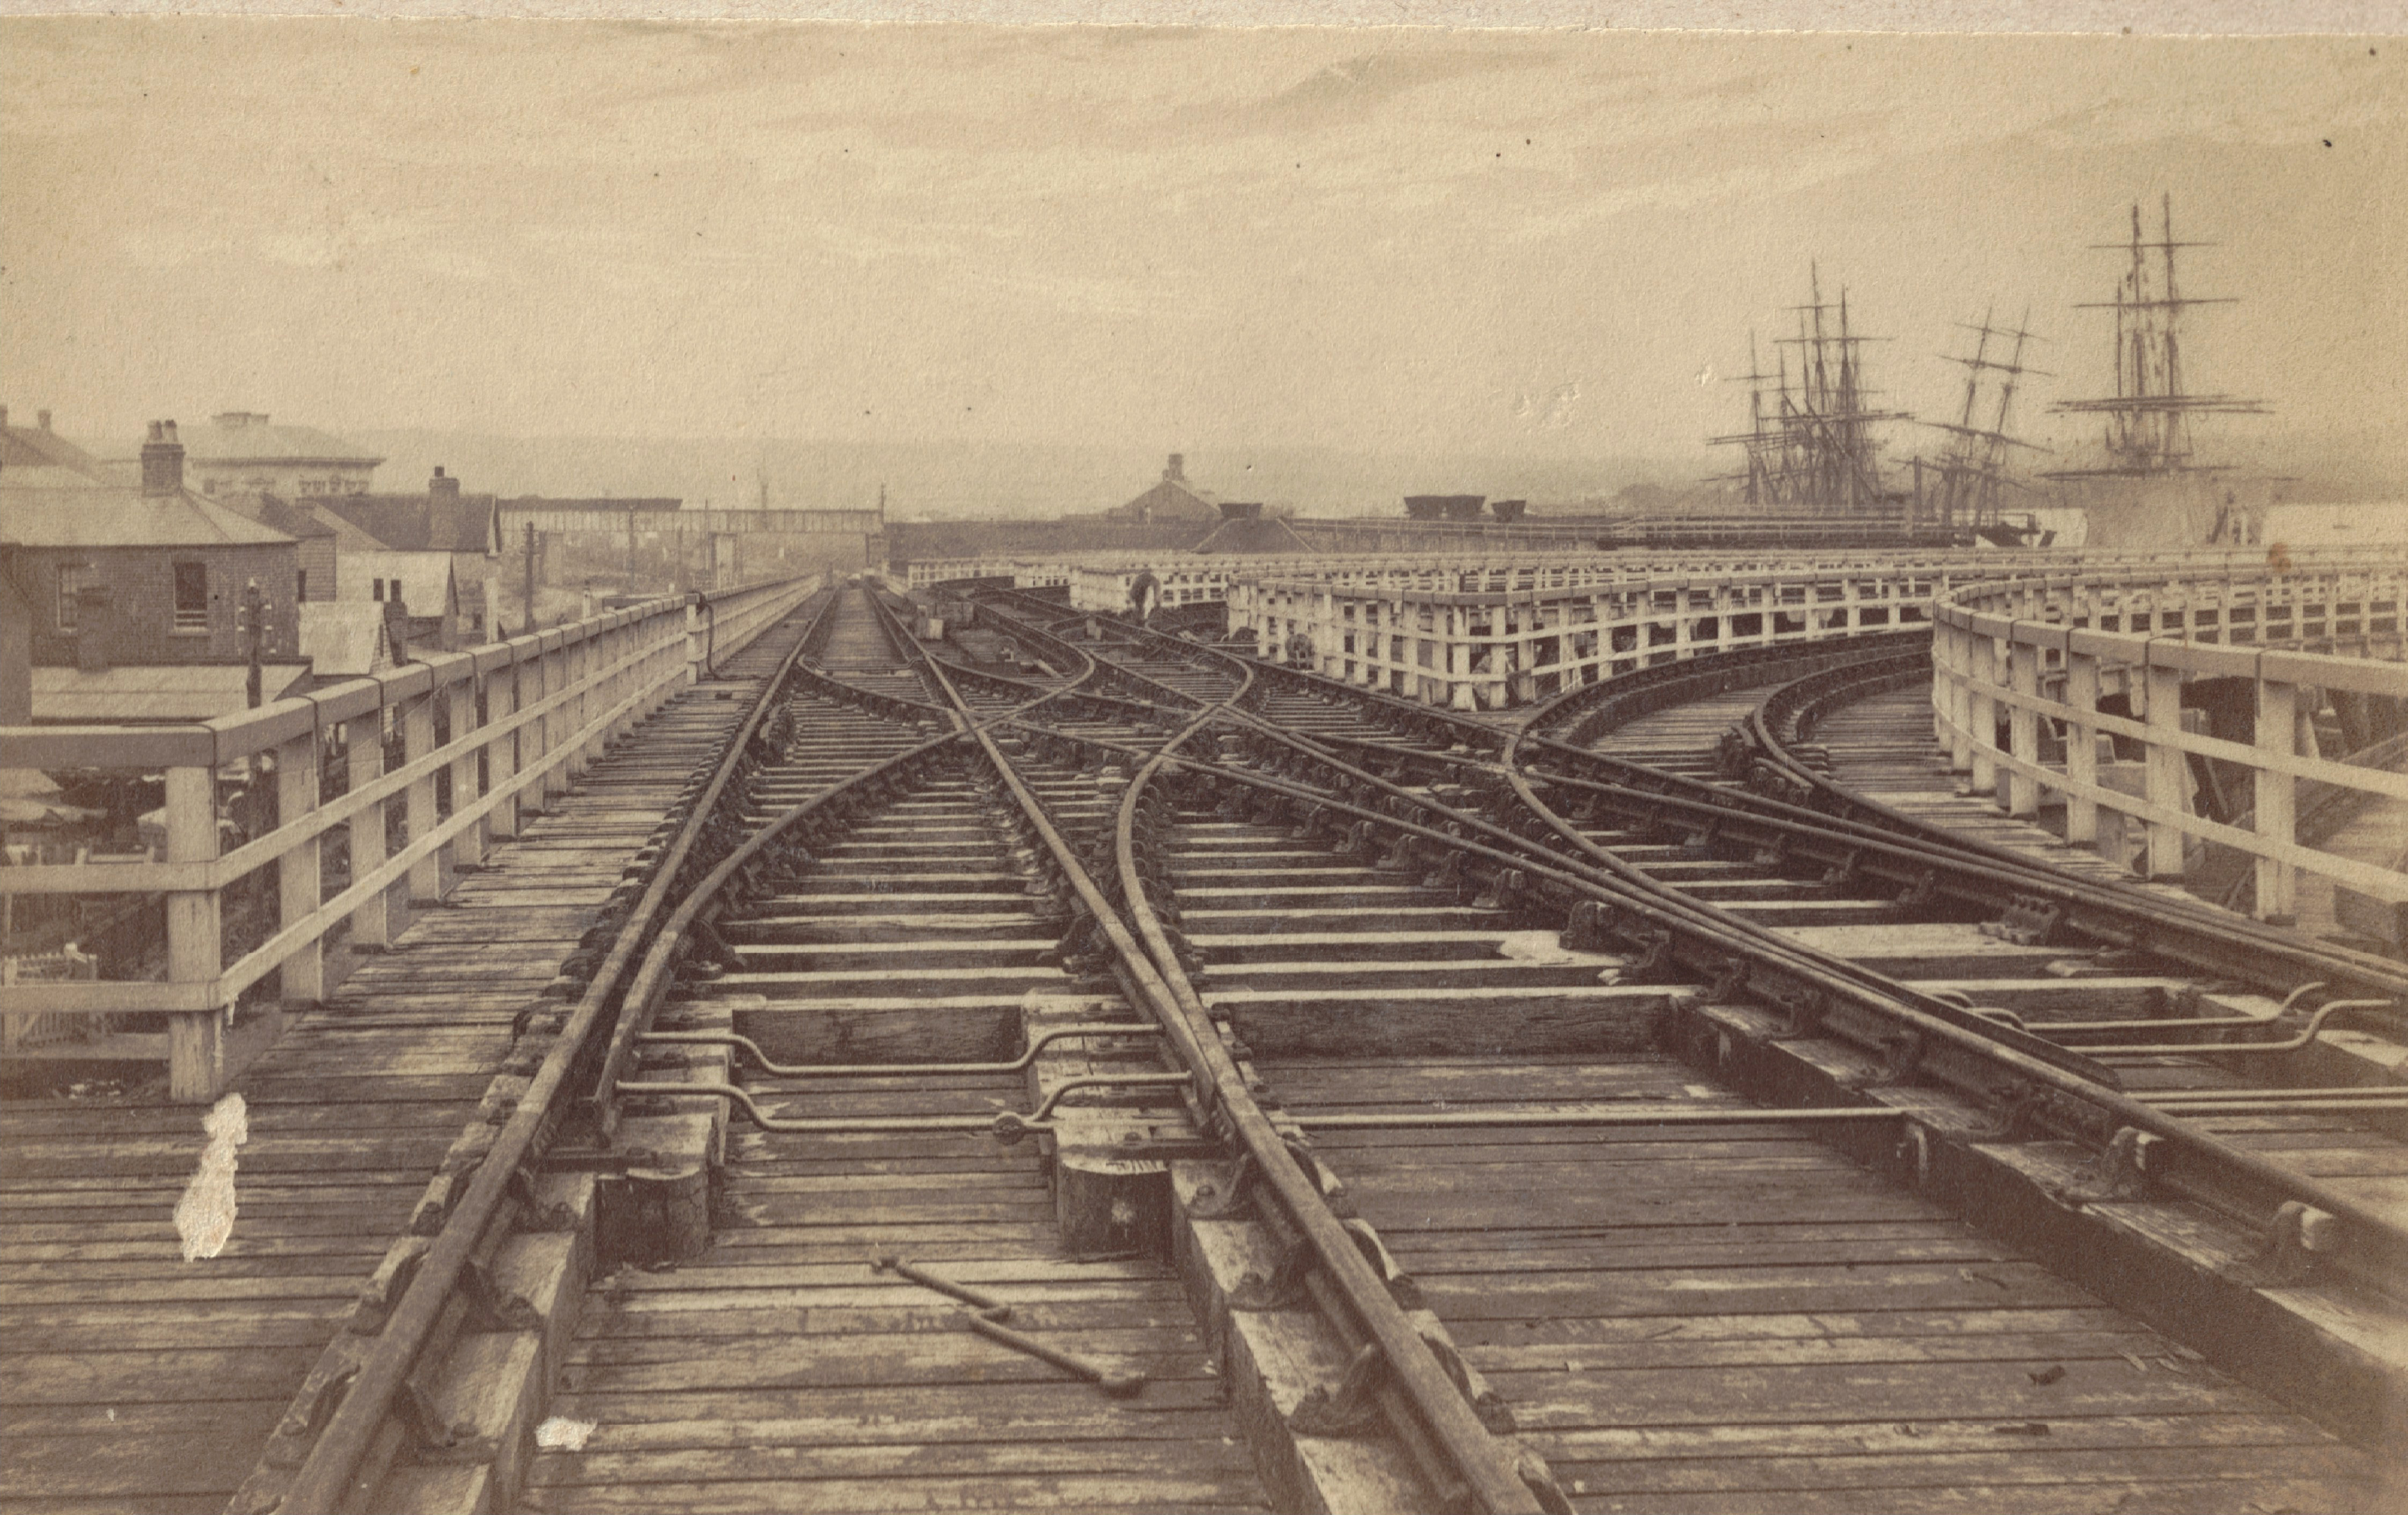 Railway Tracks on Government Staithes Newcastle circa 1870s (Photo Credit: Photographed by Beaufoy Merlin No. 58446. Digitised by Anne Glennie from Glennie Family Albums)